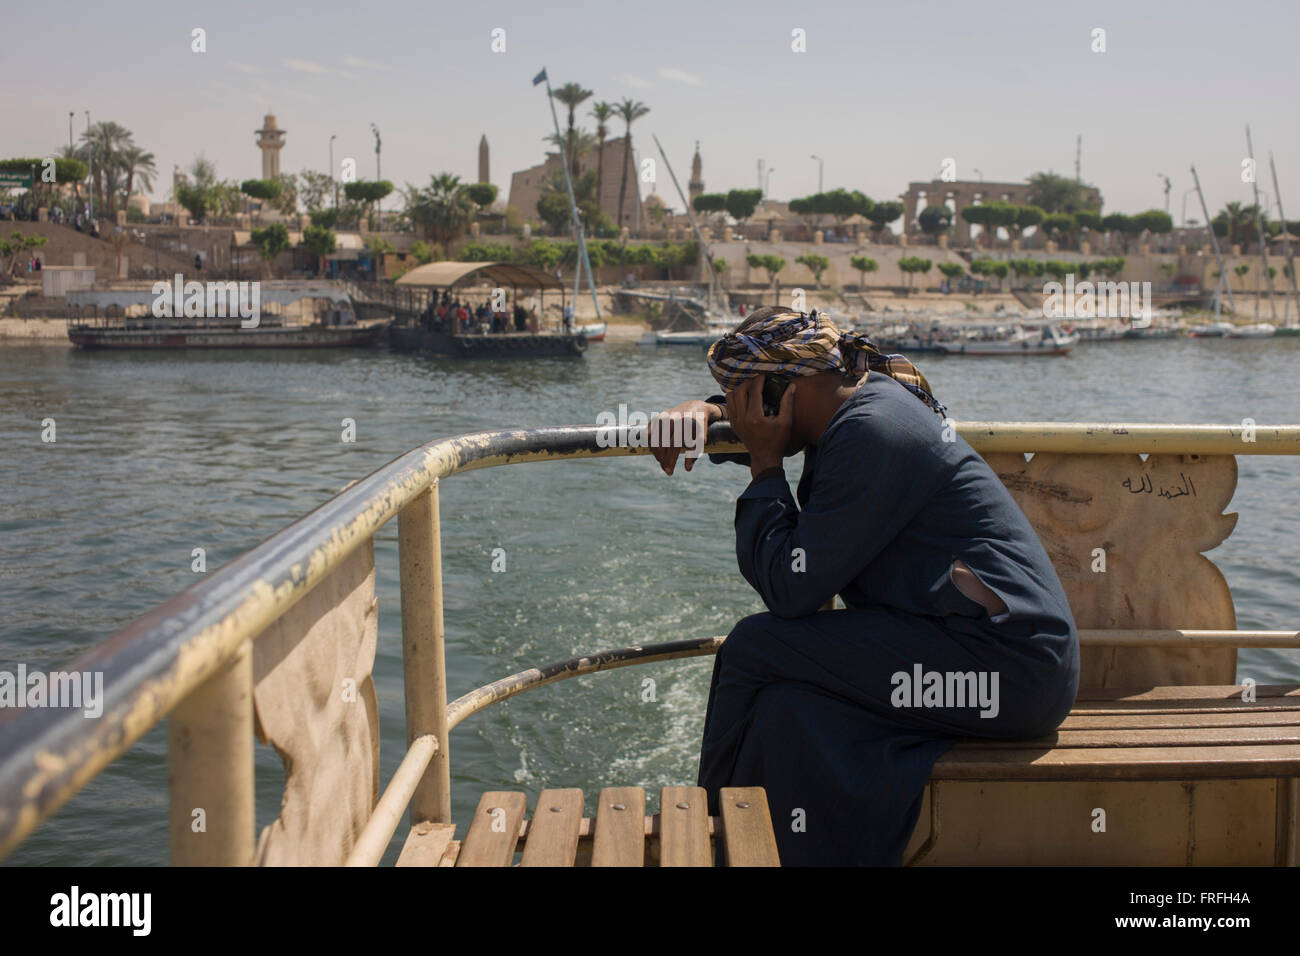 A local man talks on his mobile phone on the top deck of the state-run ferry across the River Nile at Luxor, Nile Valley, Egypt. Stock Photo